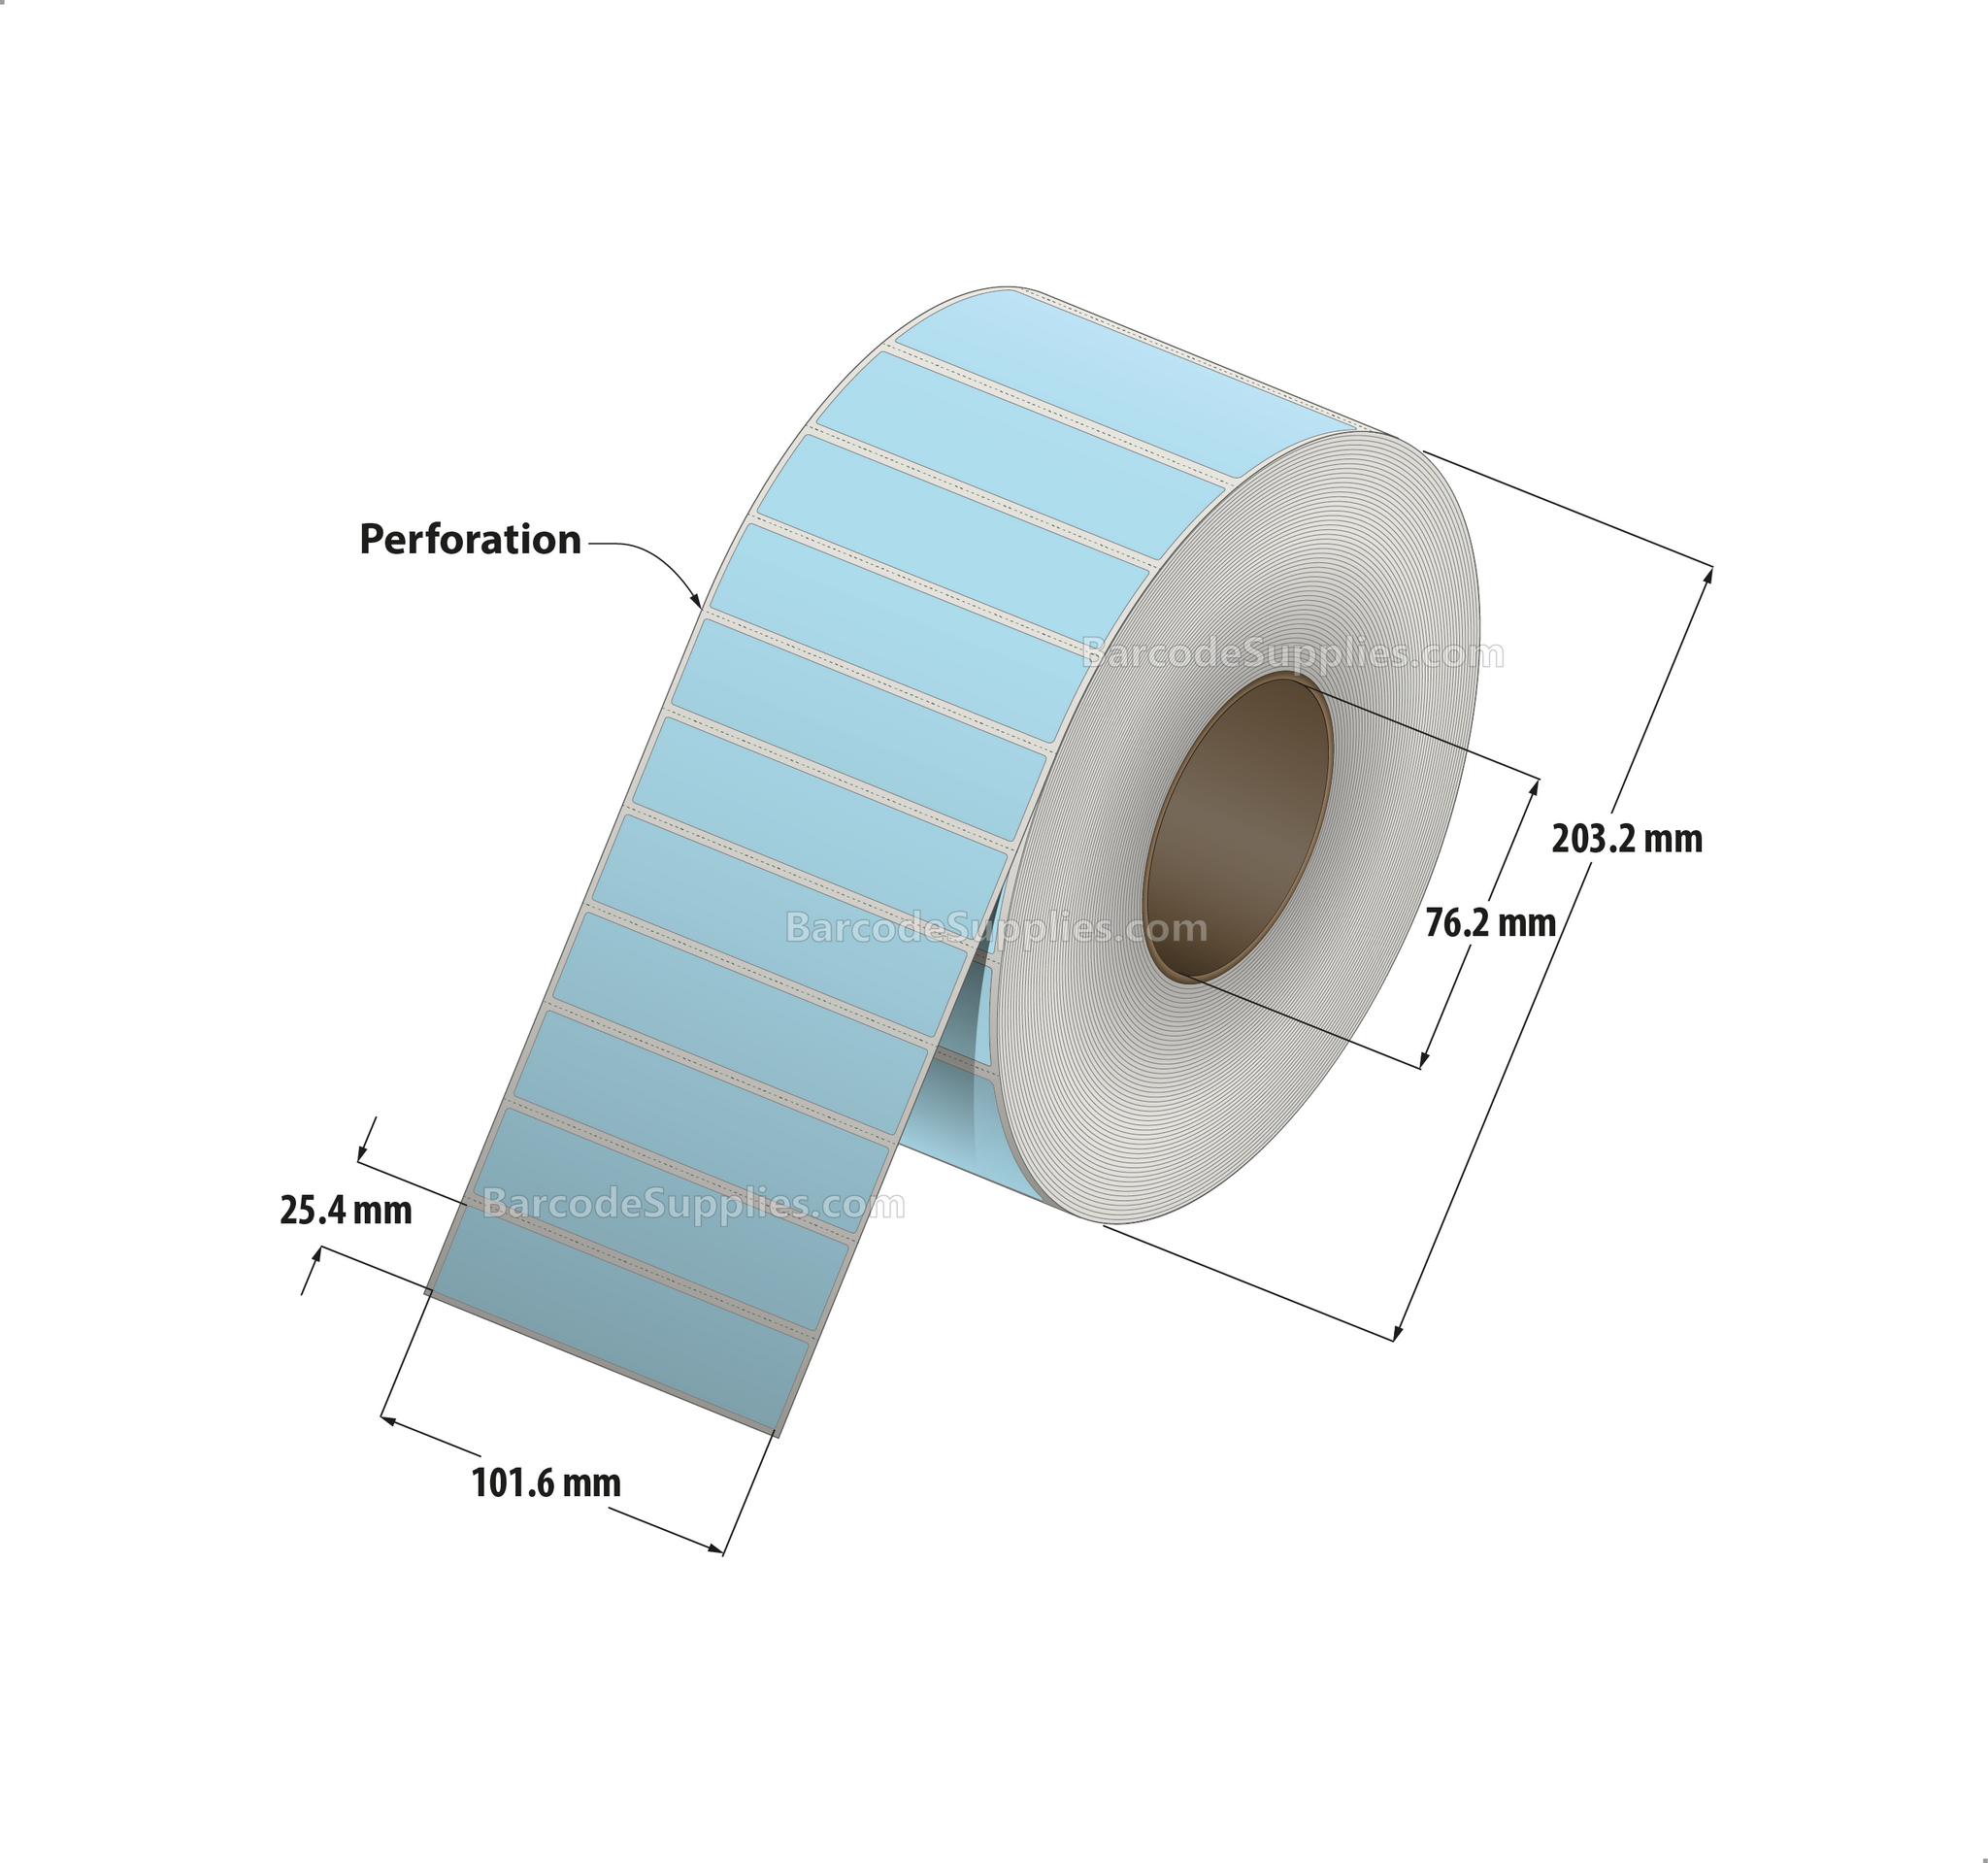 4 x 1 Thermal Transfer 290 Blue Labels With Permanent Adhesive - Perforated - 5500 Labels Per Roll - Carton Of 4 Rolls - 22000 Labels Total - MPN: RFC-4-1-5500-BL